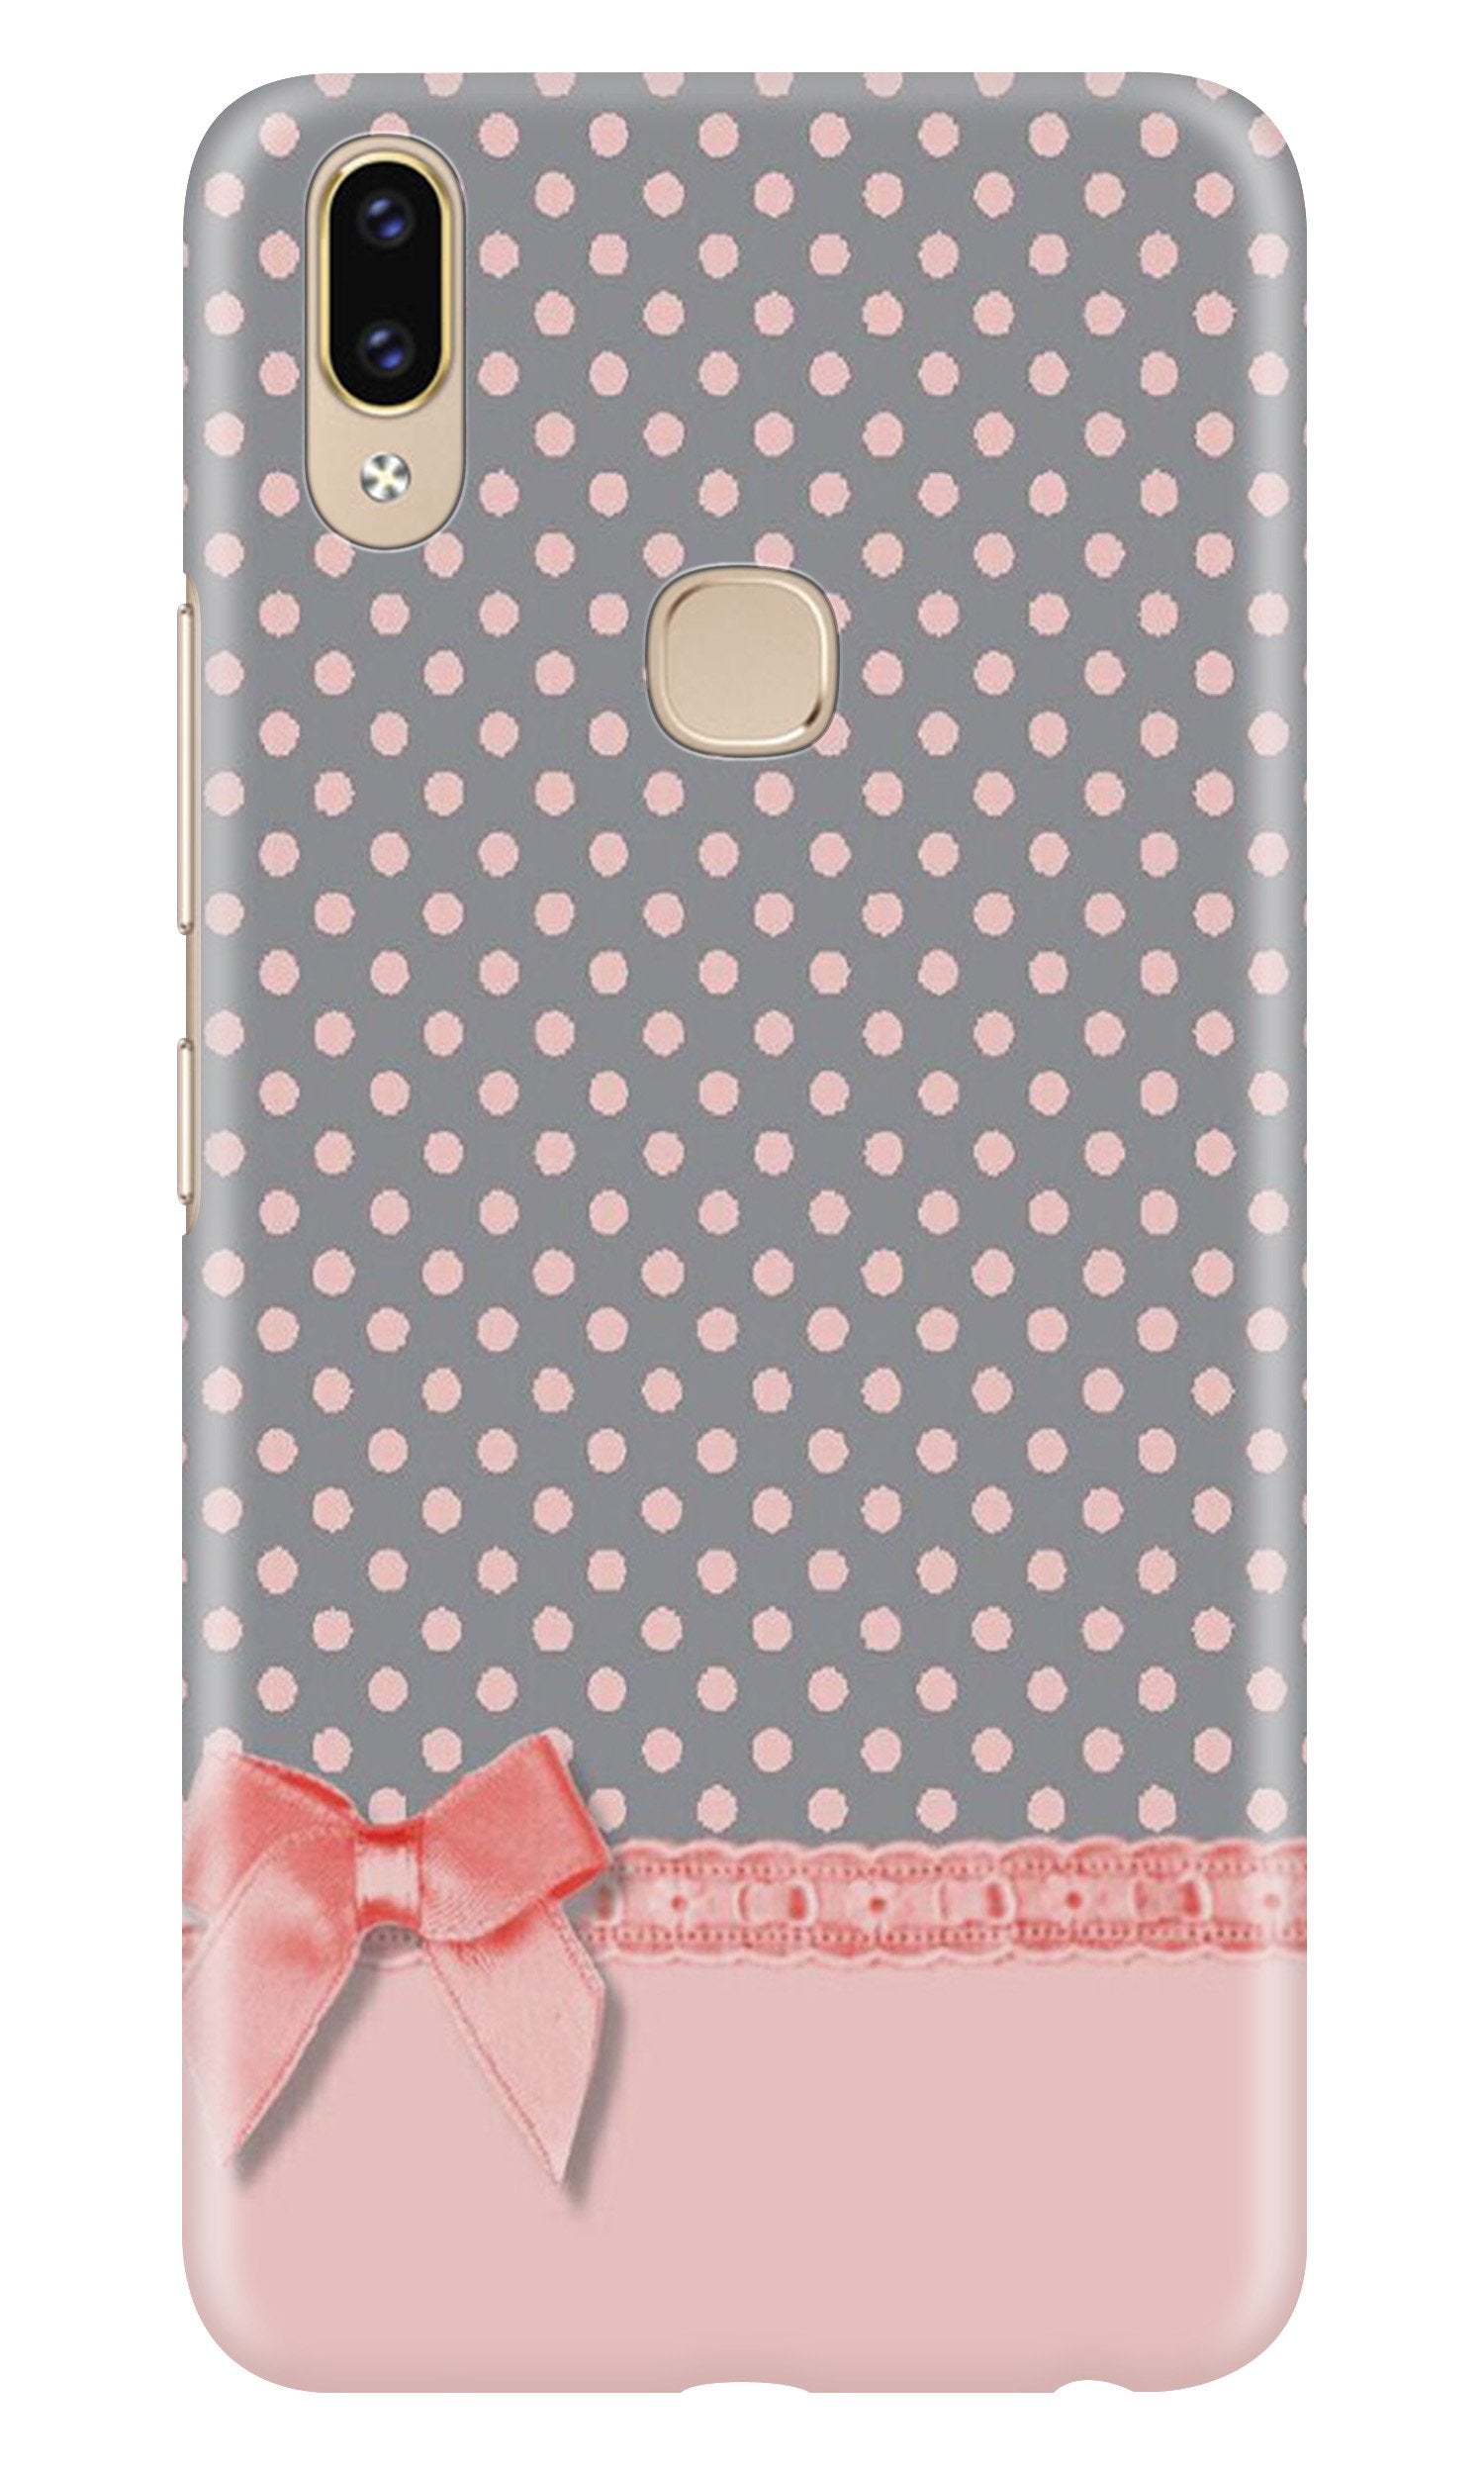 Gift Wrap2 Case for Asus Zenfone Max M2